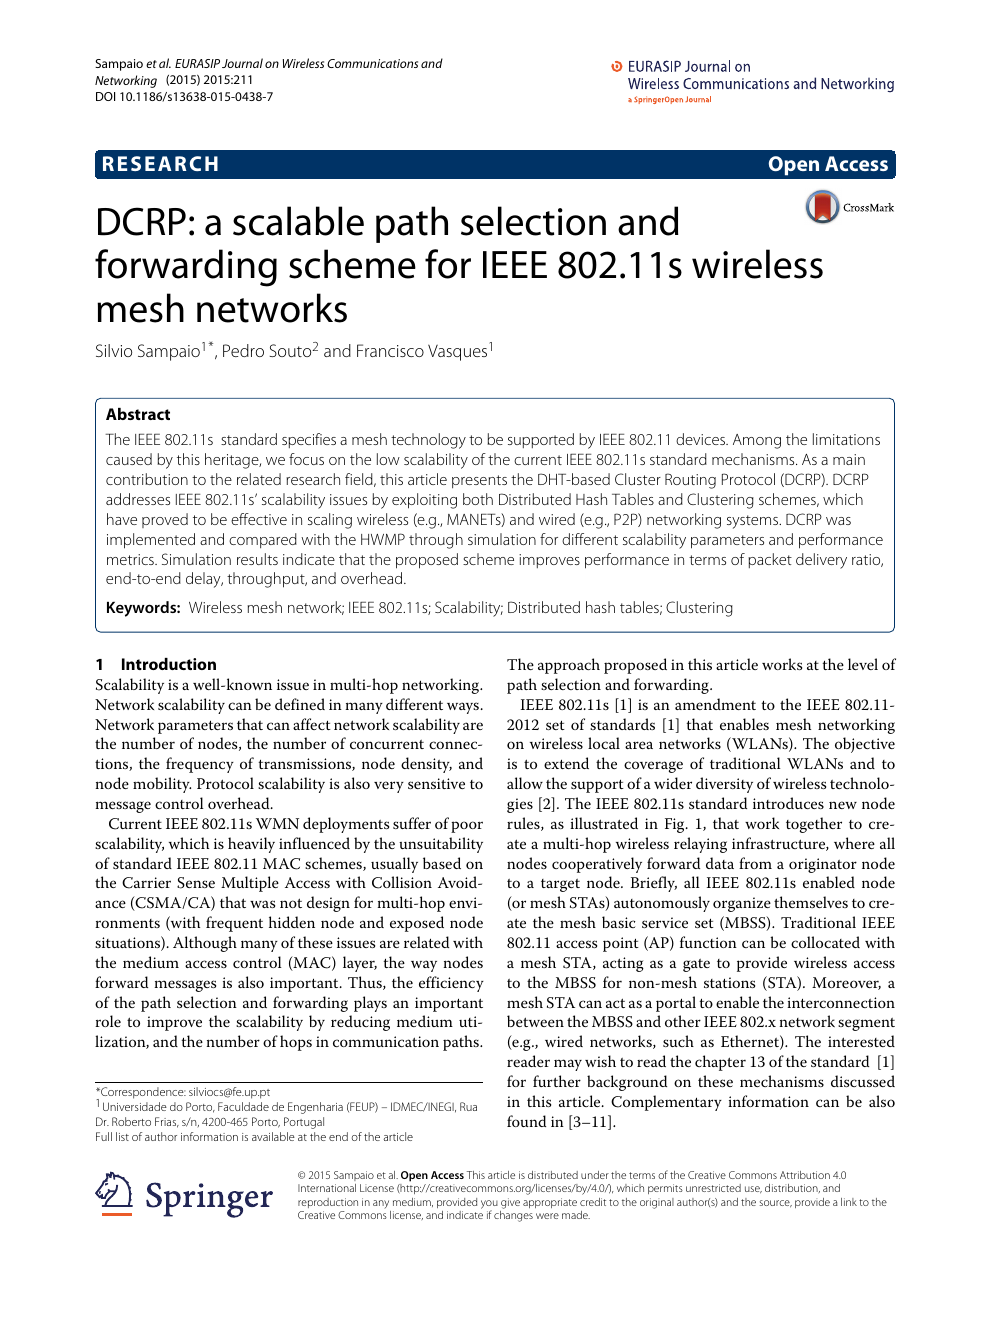 Dcrp A Scalable Path Selection And Forwarding Scheme For Ieee 802 11s Wireless Mesh Networks Topic Of Research Paper In Electrical Engineering Electronic Engineering Information Engineering Download Scholarly Article Pdf And Read